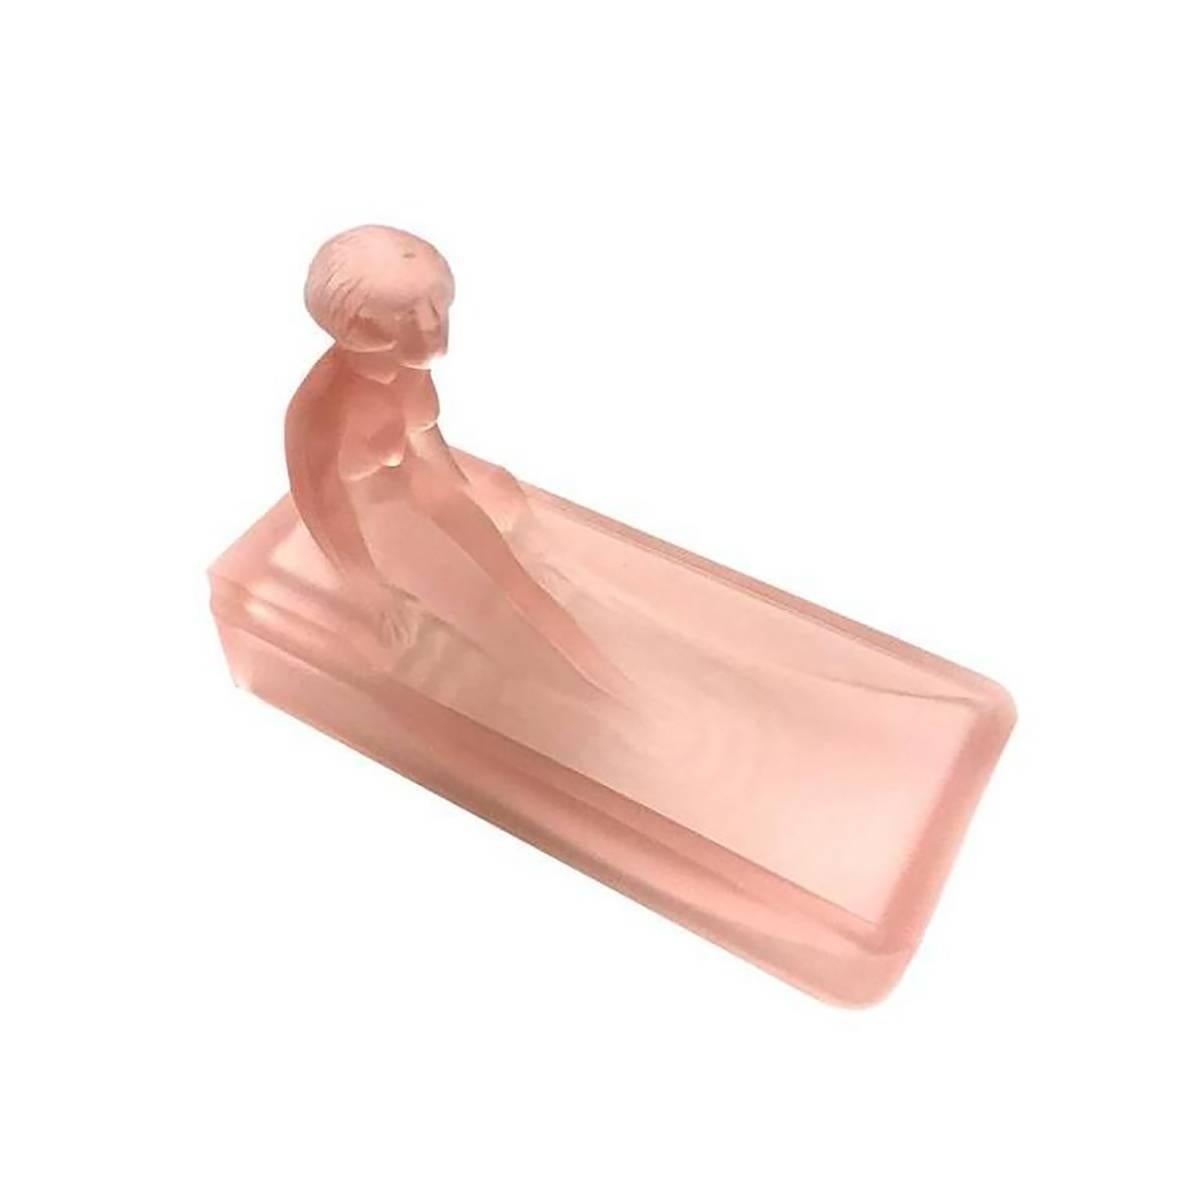 This 1970s re-edition of a 1927 Art Deco Heinrich Hoffman pink art glass soap dish/ring tray features a nude female figure bathing in a tub.

Condition: Excellent.
Specifications: Height 2.75, width 6, depth 4.
Materials /techniques: